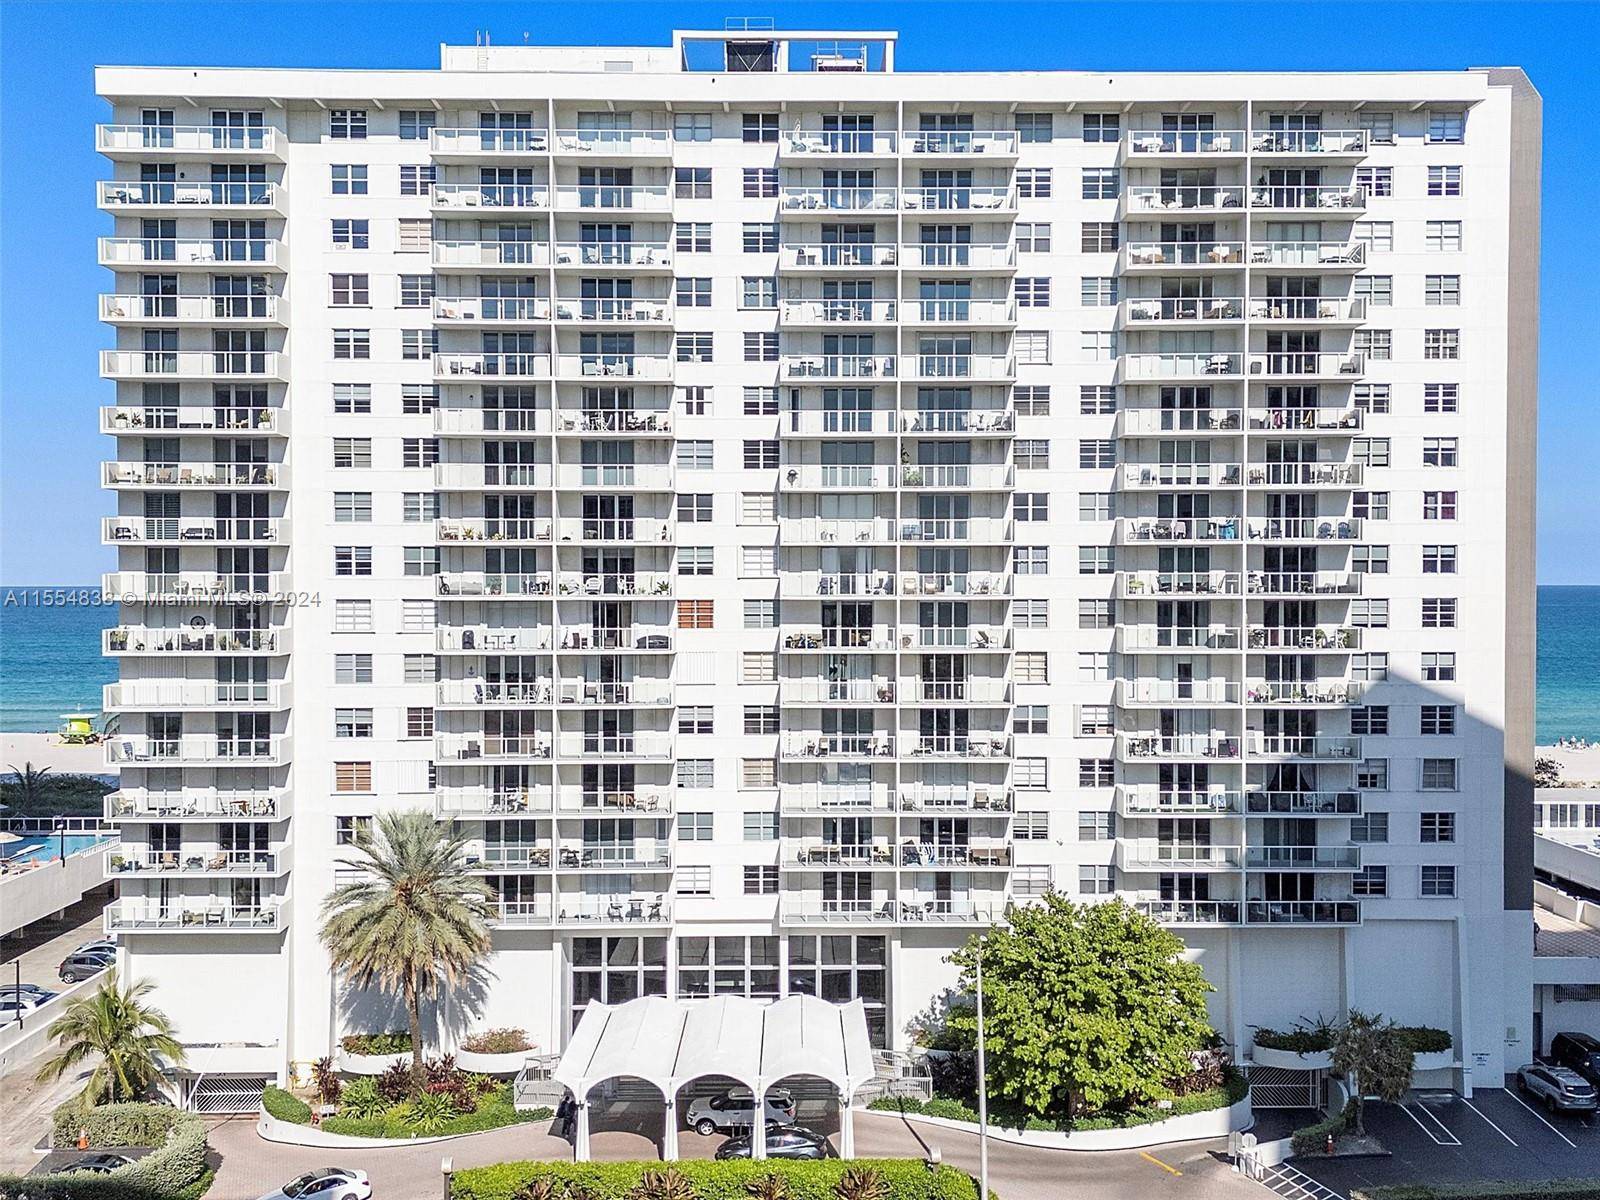 Recently renovated waterfront residence with direct ocean views at the Arlen Beach Condominium.